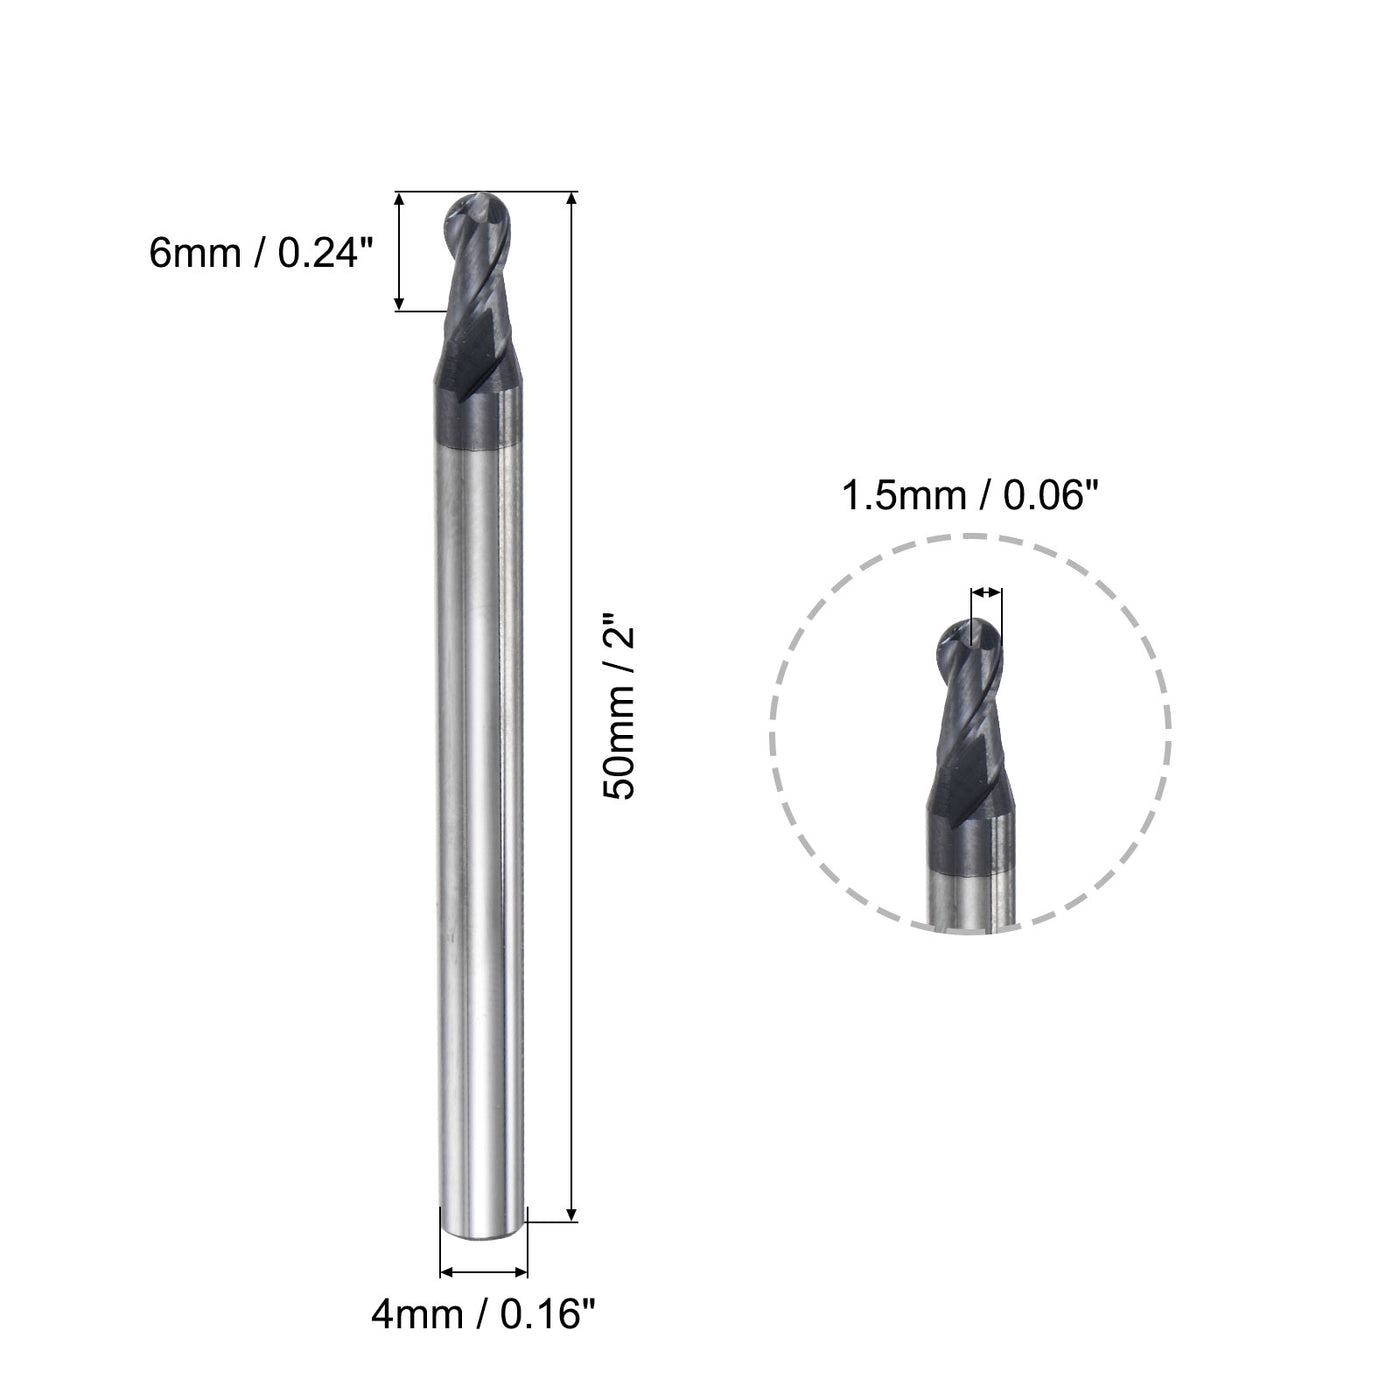 uxcell Uxcell 1.5mm Radius 50mm Long HRC45 Carbide AlTiSin Coated 2 Flute Ball Nose End Mill